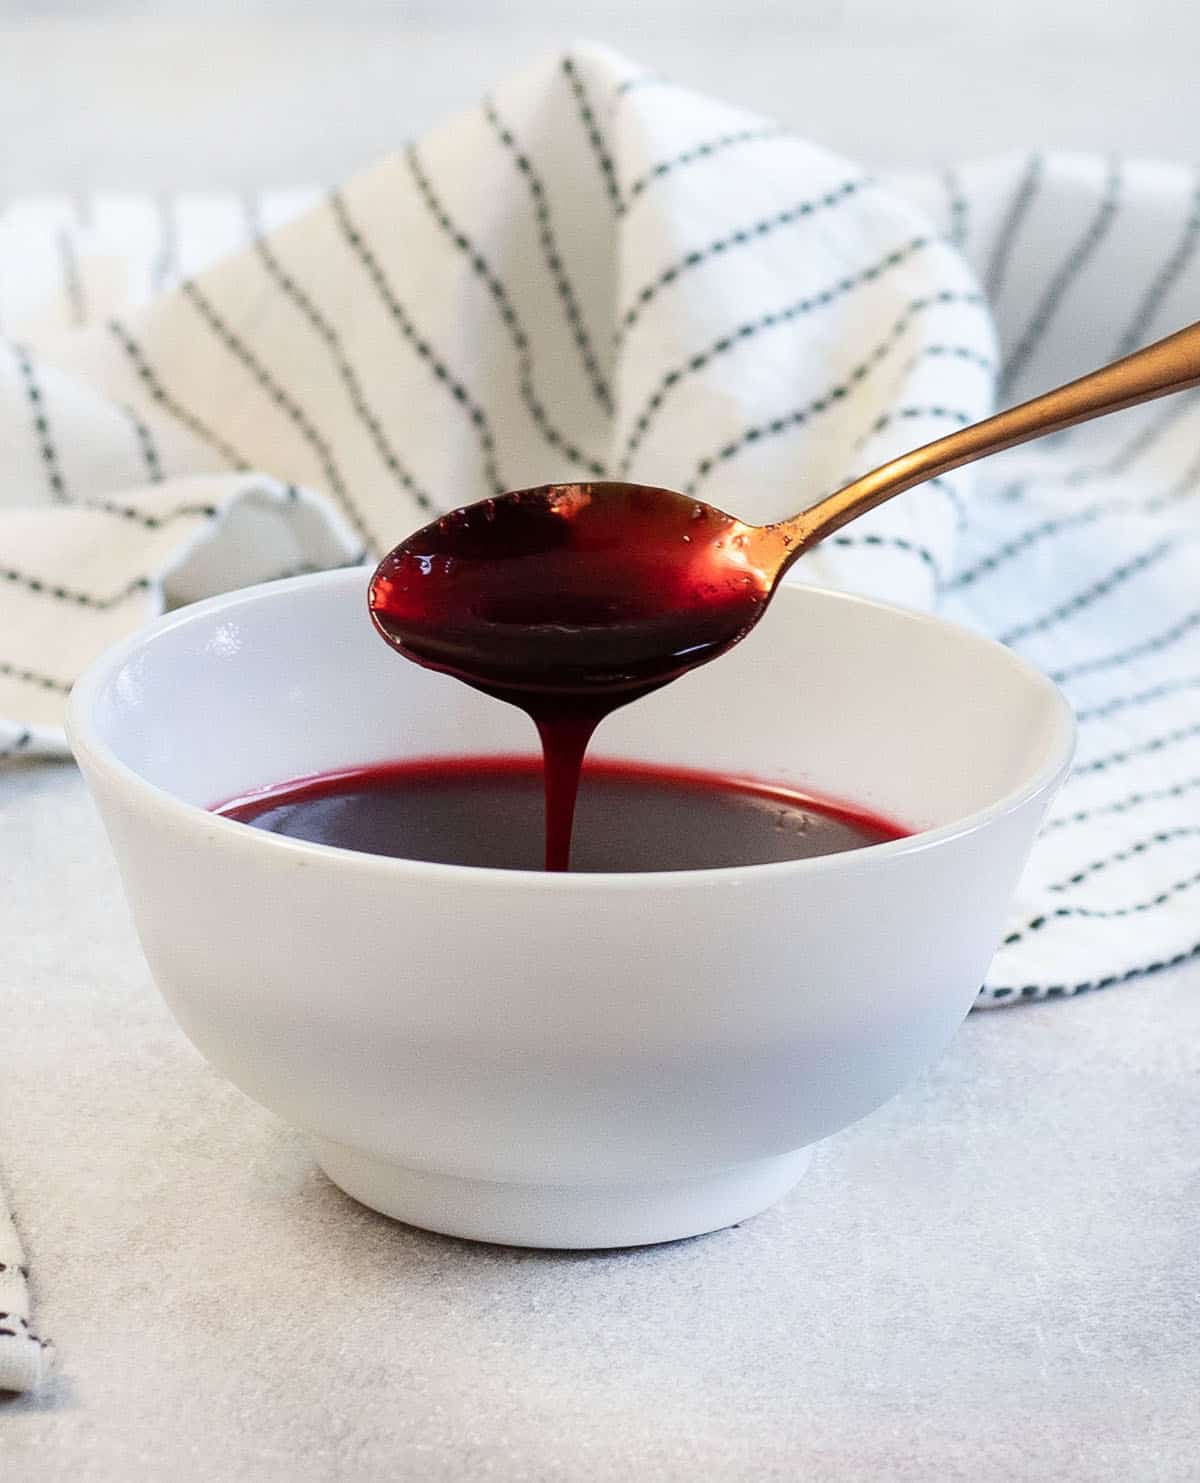 Blackberry Simple Syrup in a bowl